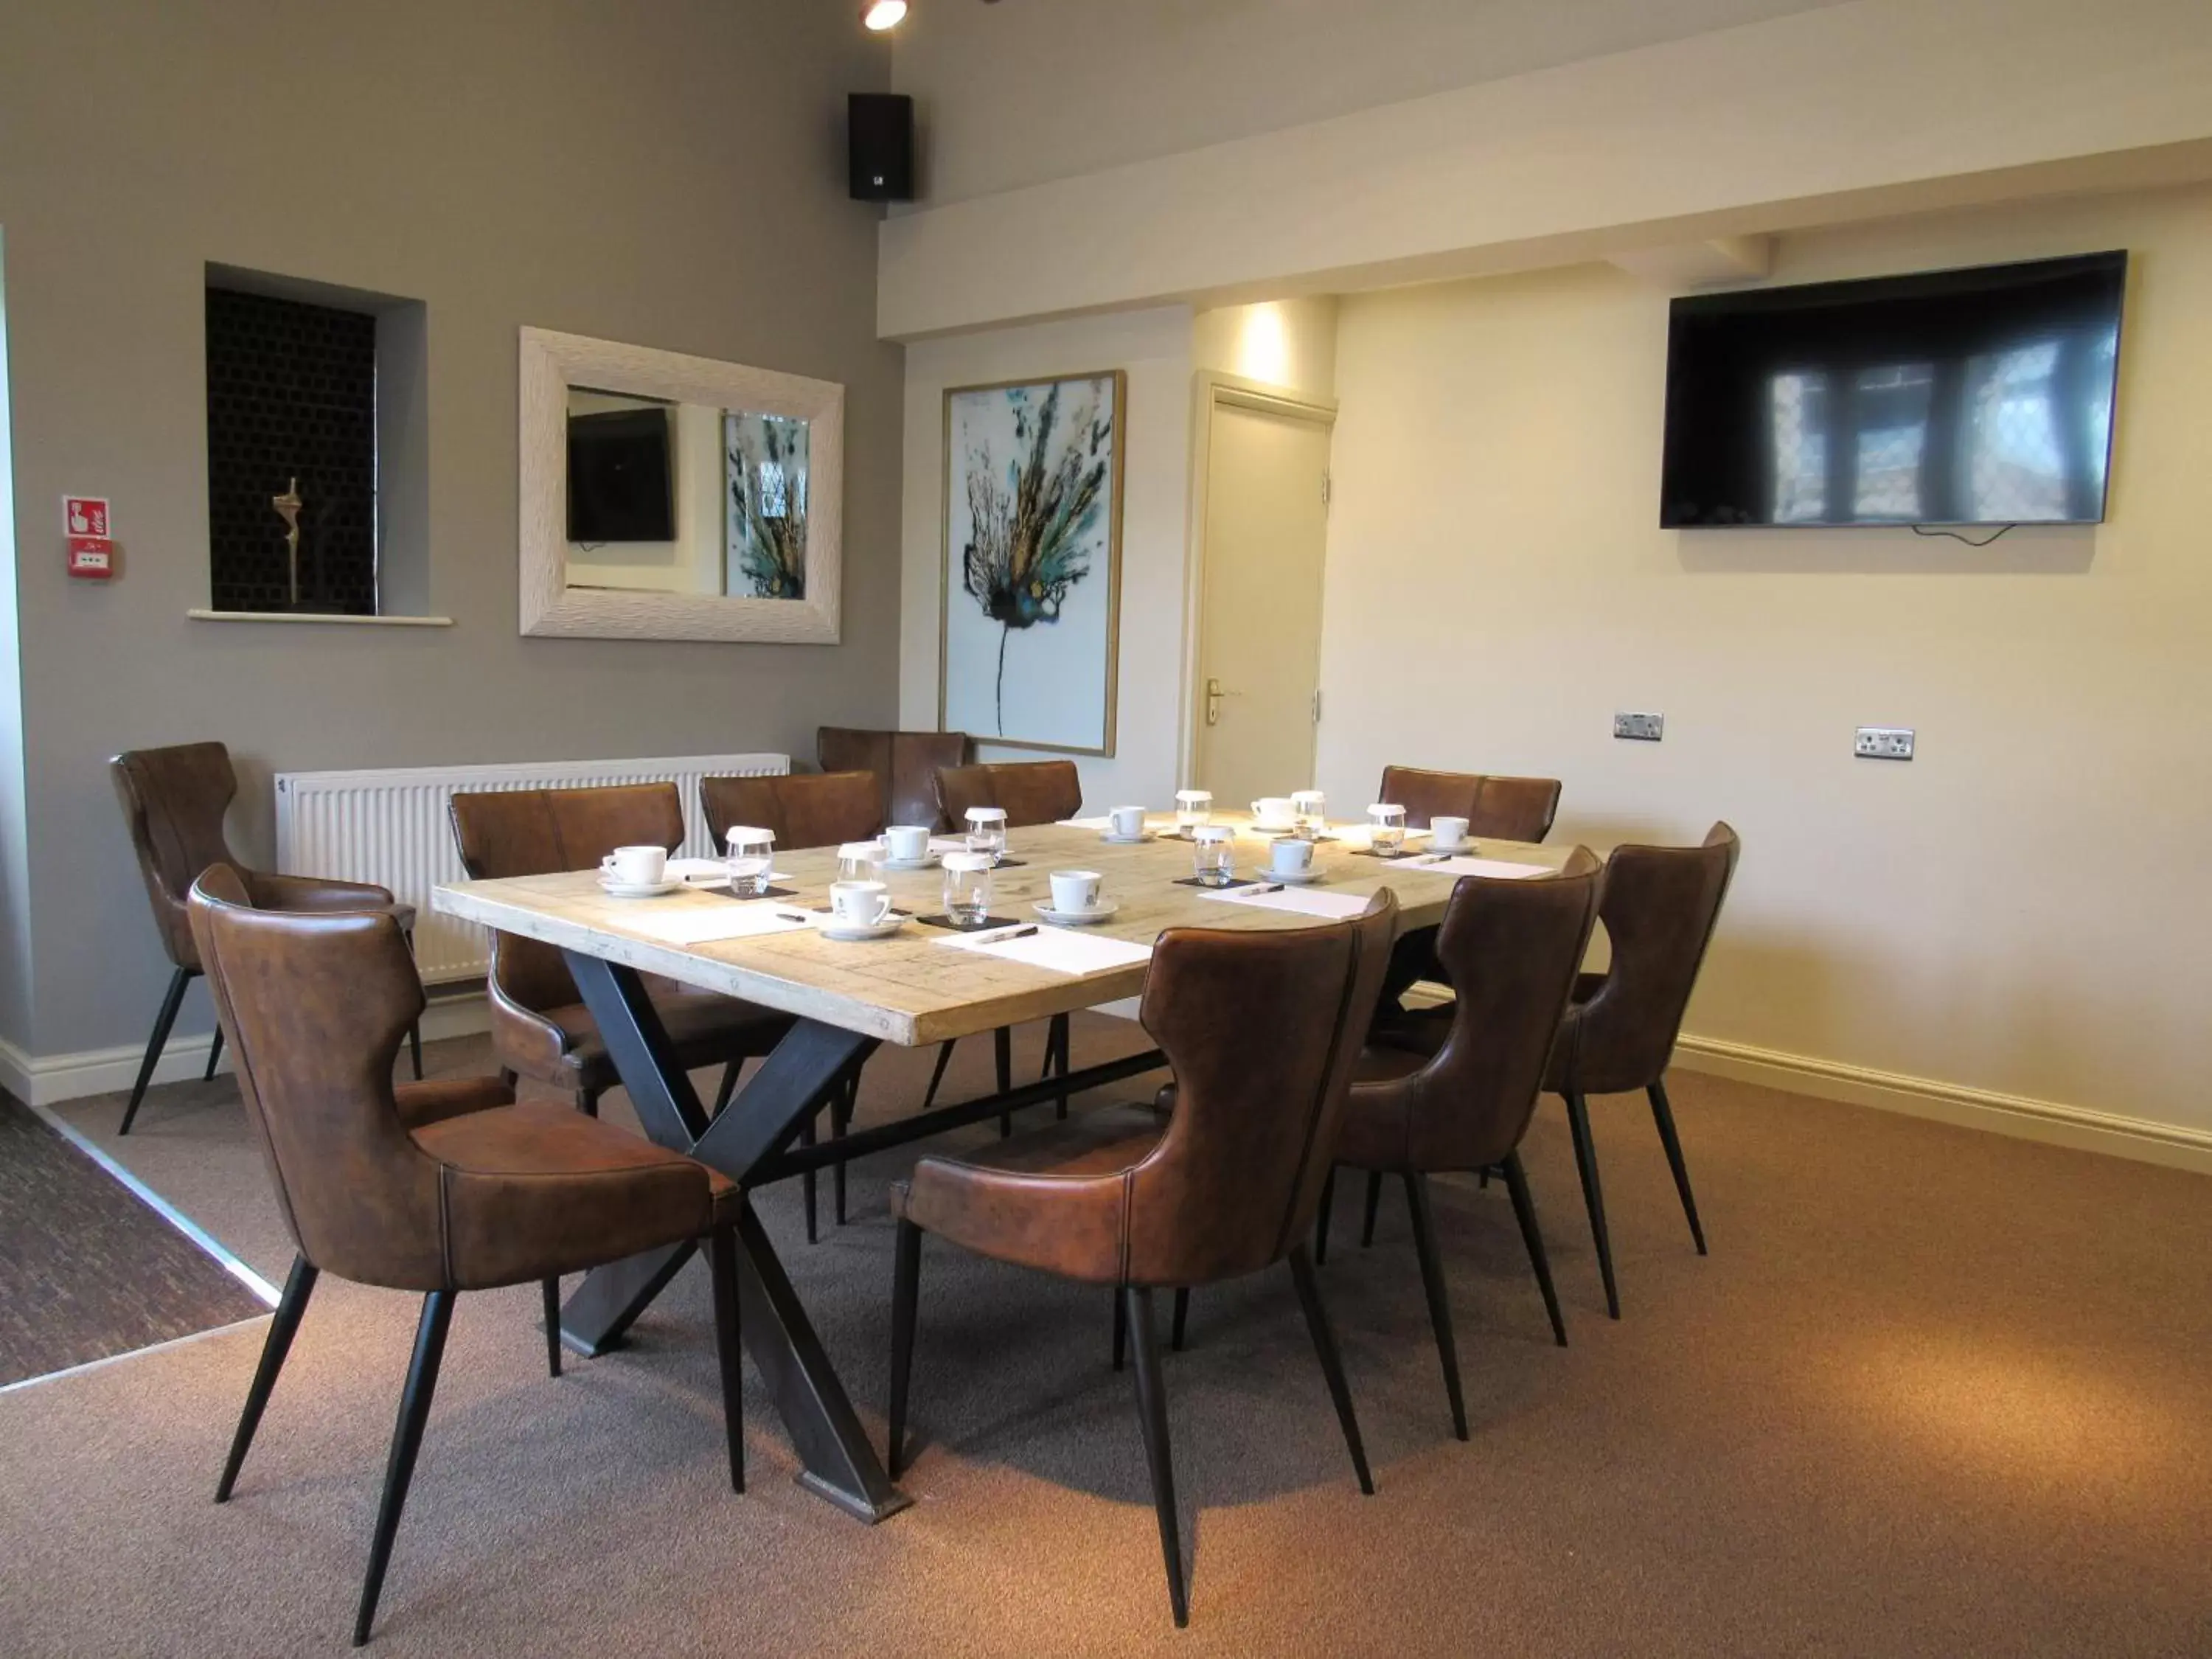 Meeting/conference room in The Rutland Arms Hotel, Bakewell, Derbyshire